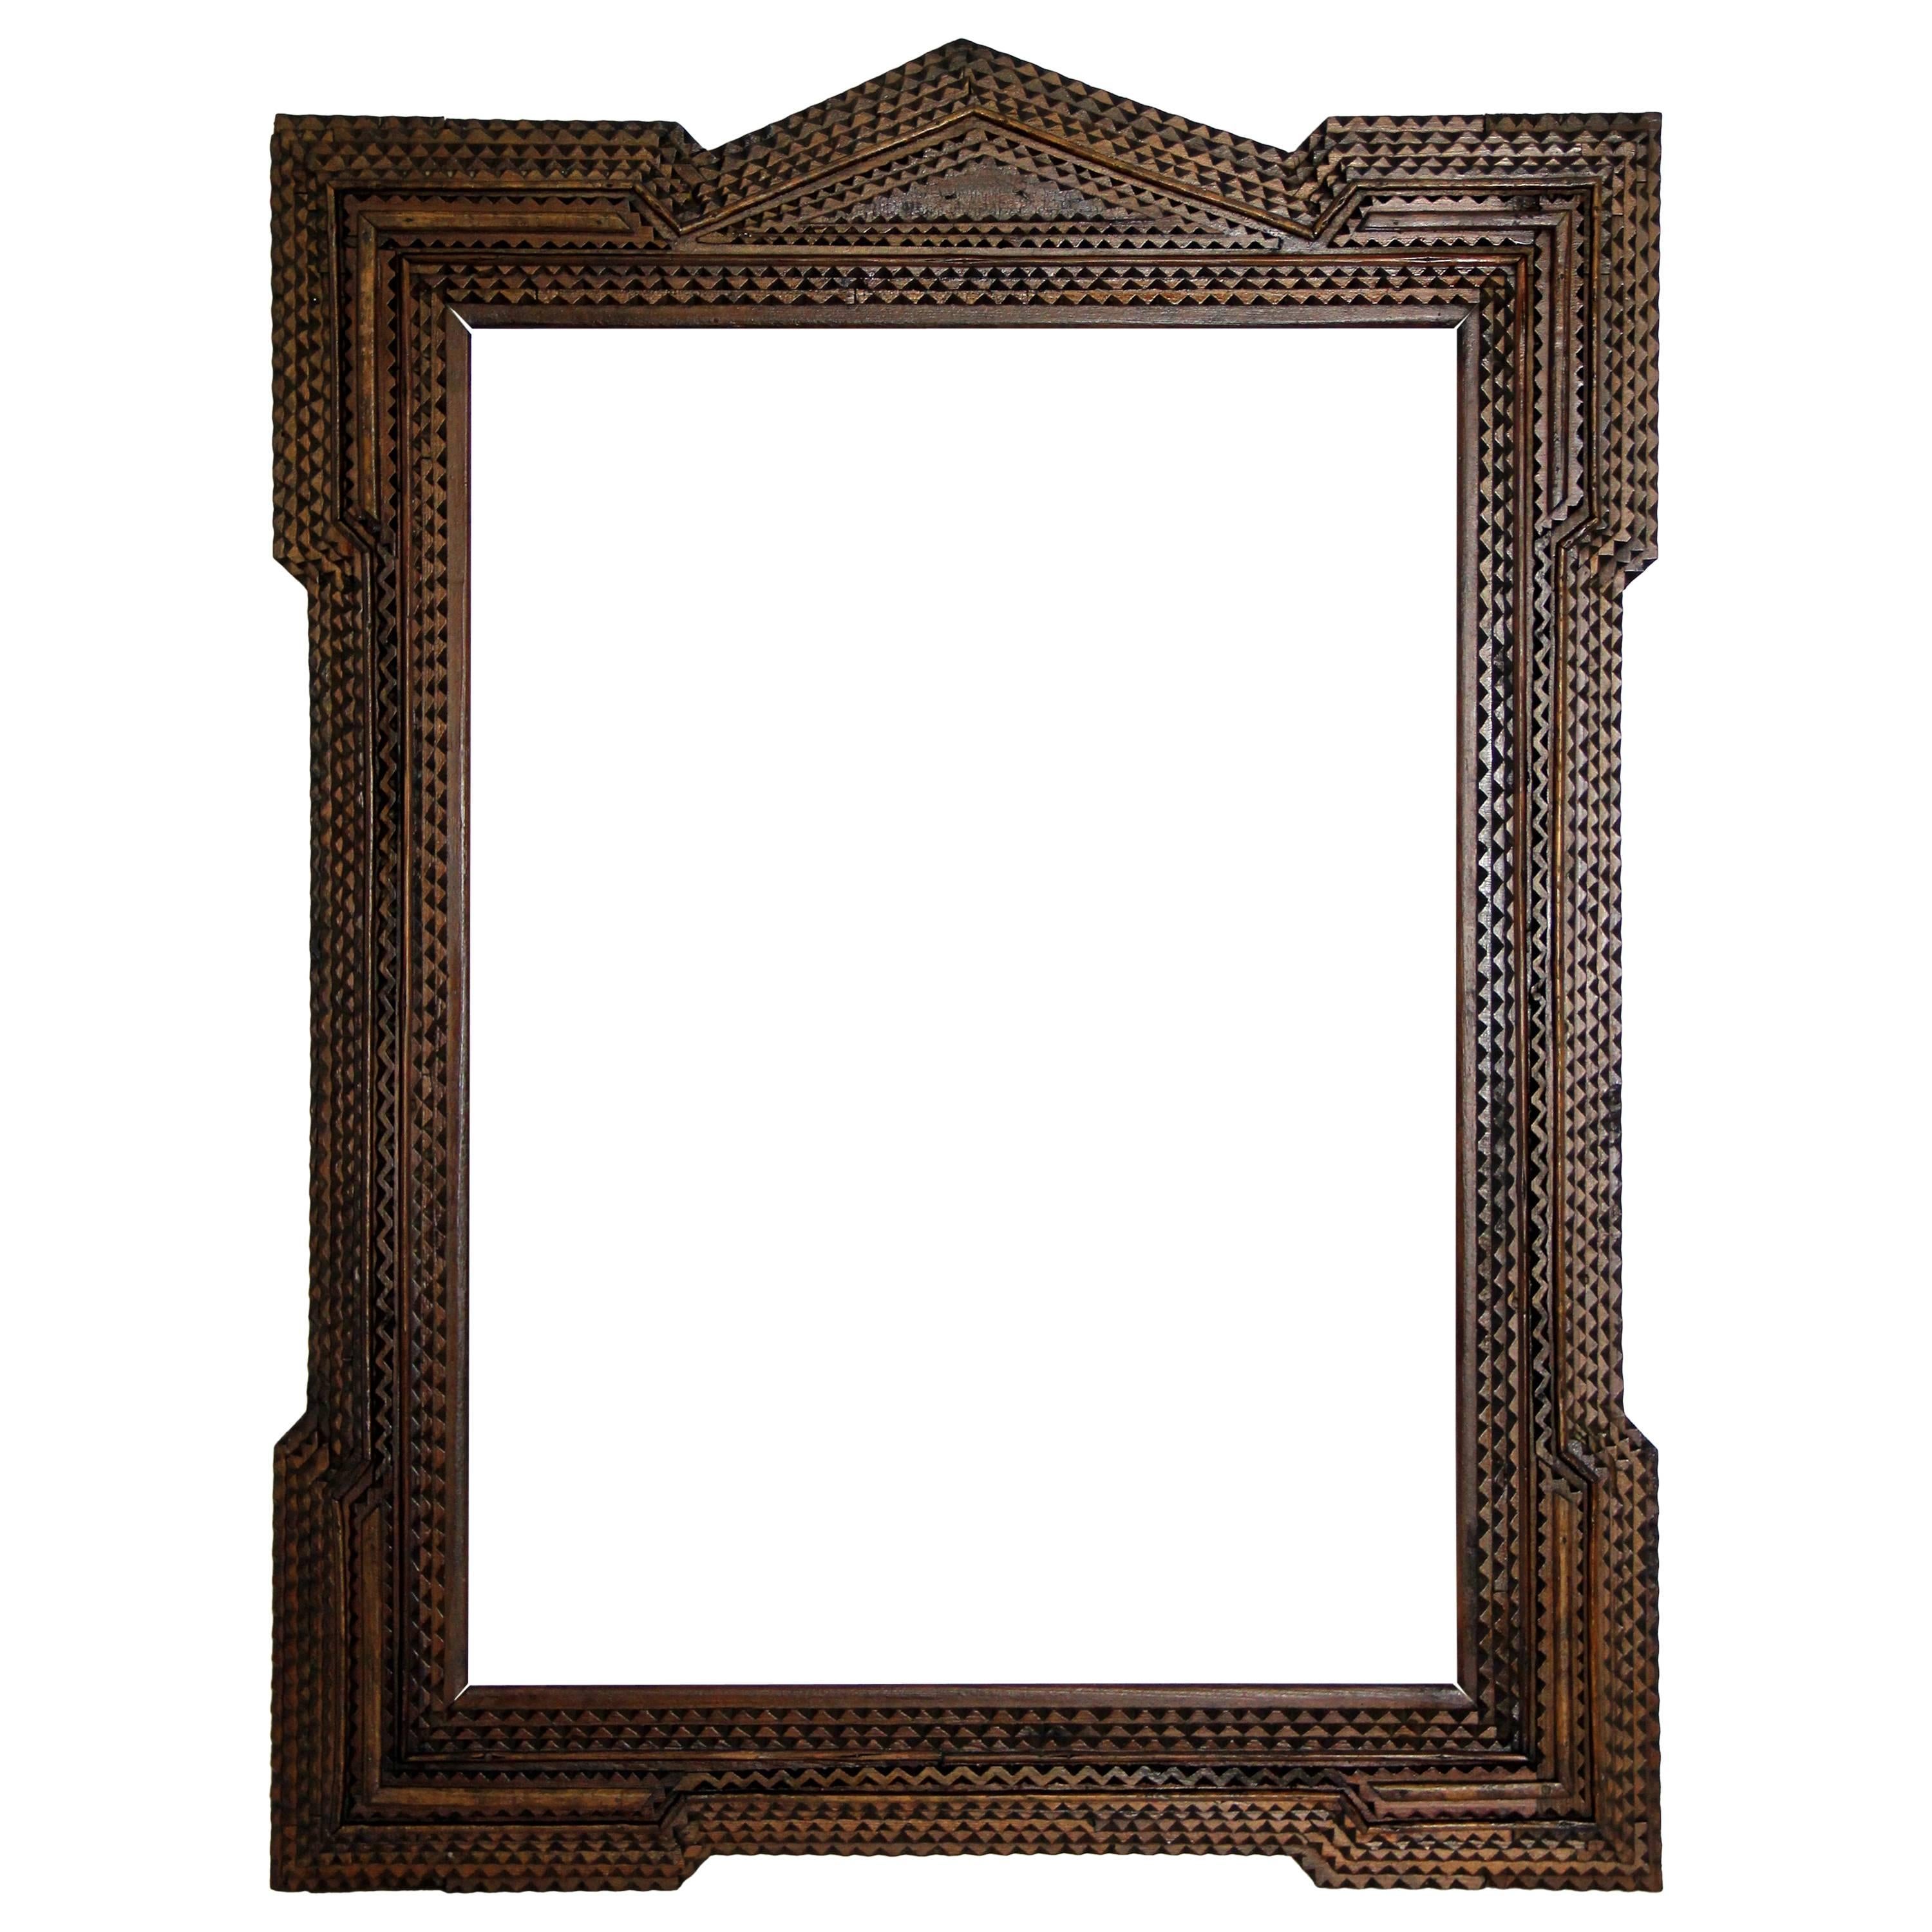 Hand-Carved Tramp Art Frame from Austria, circa 1900